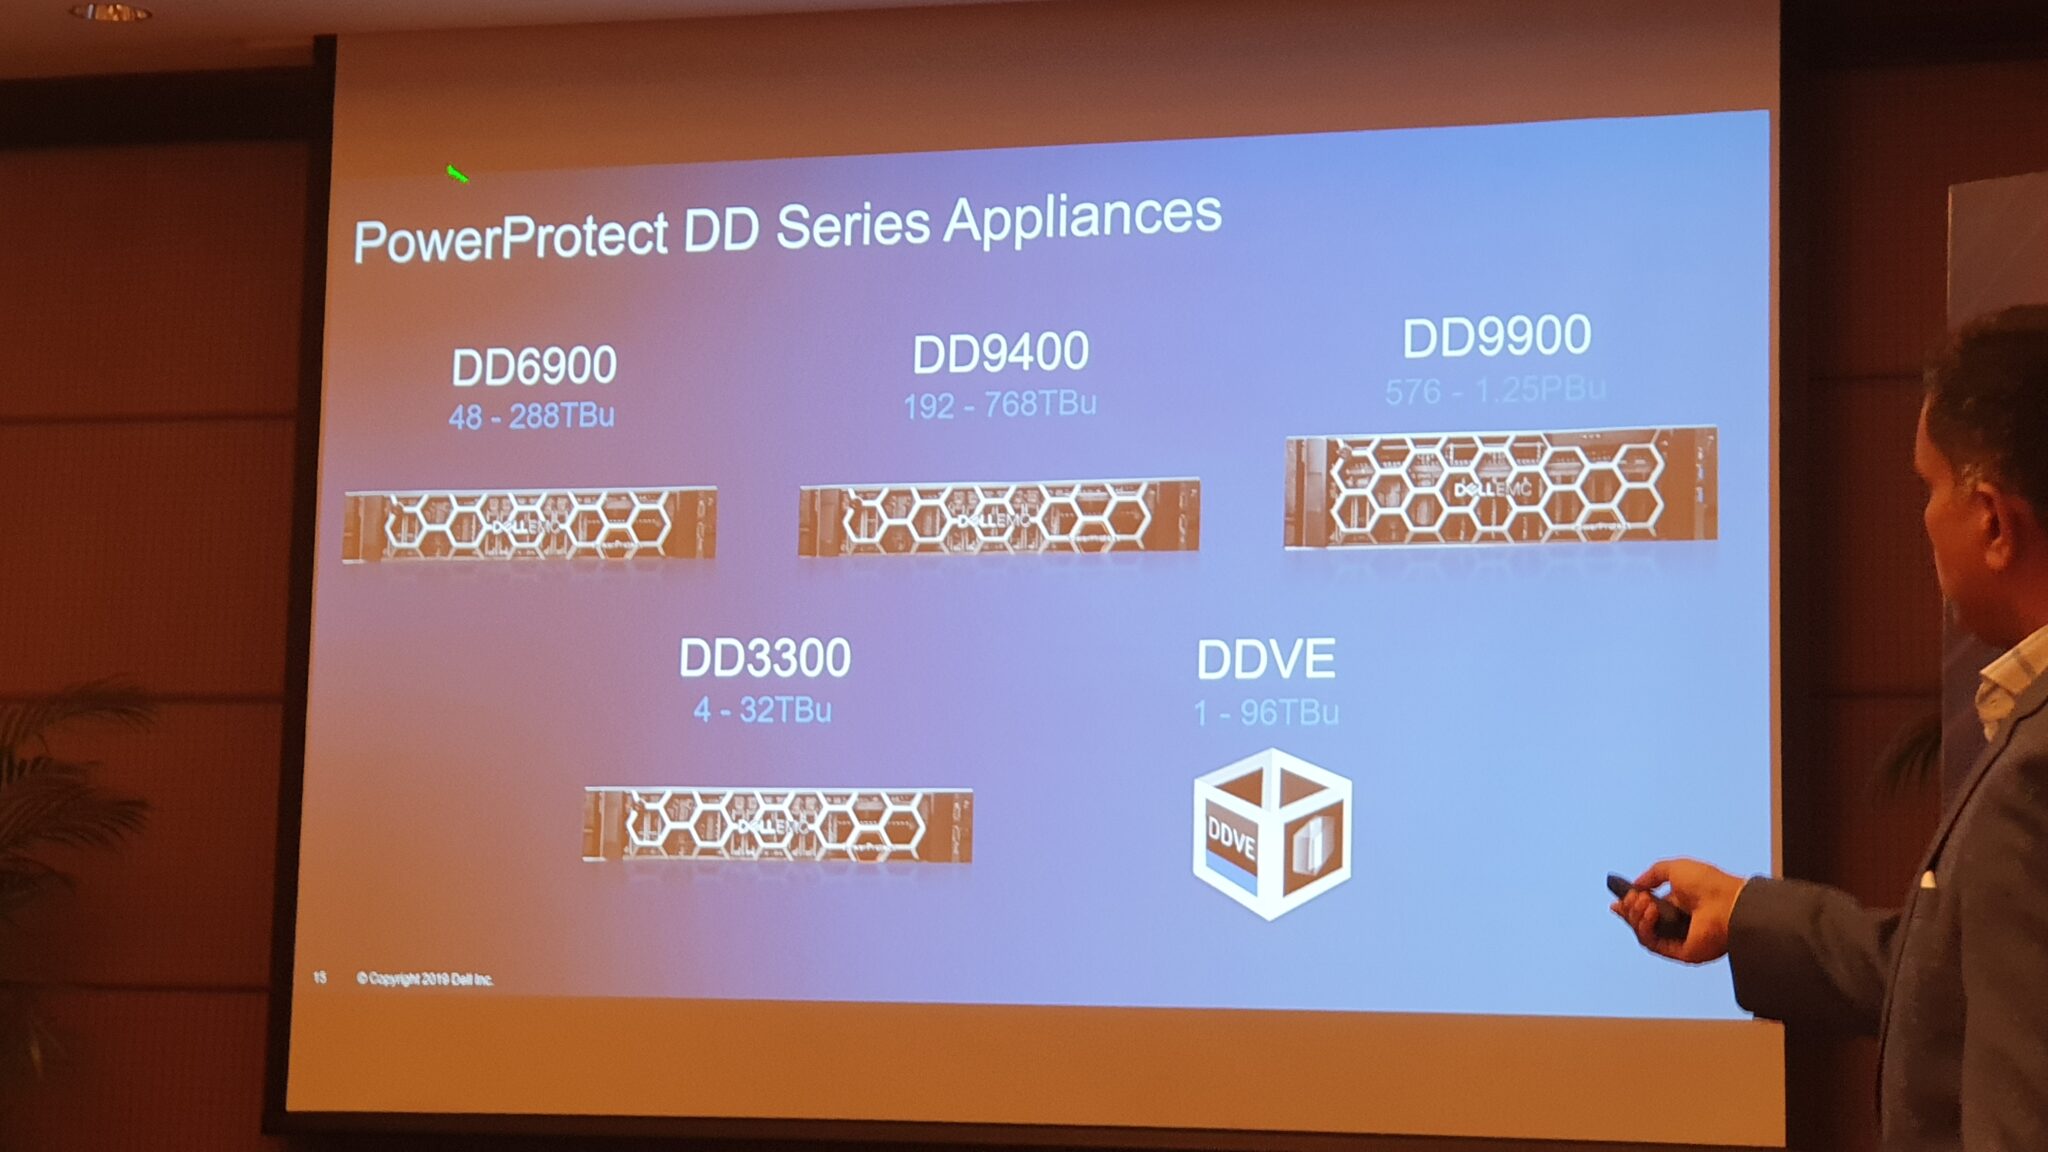 Dell showcases their latest PowerProtect DD Series appliances in Malaysia to keep data safe and sound 2